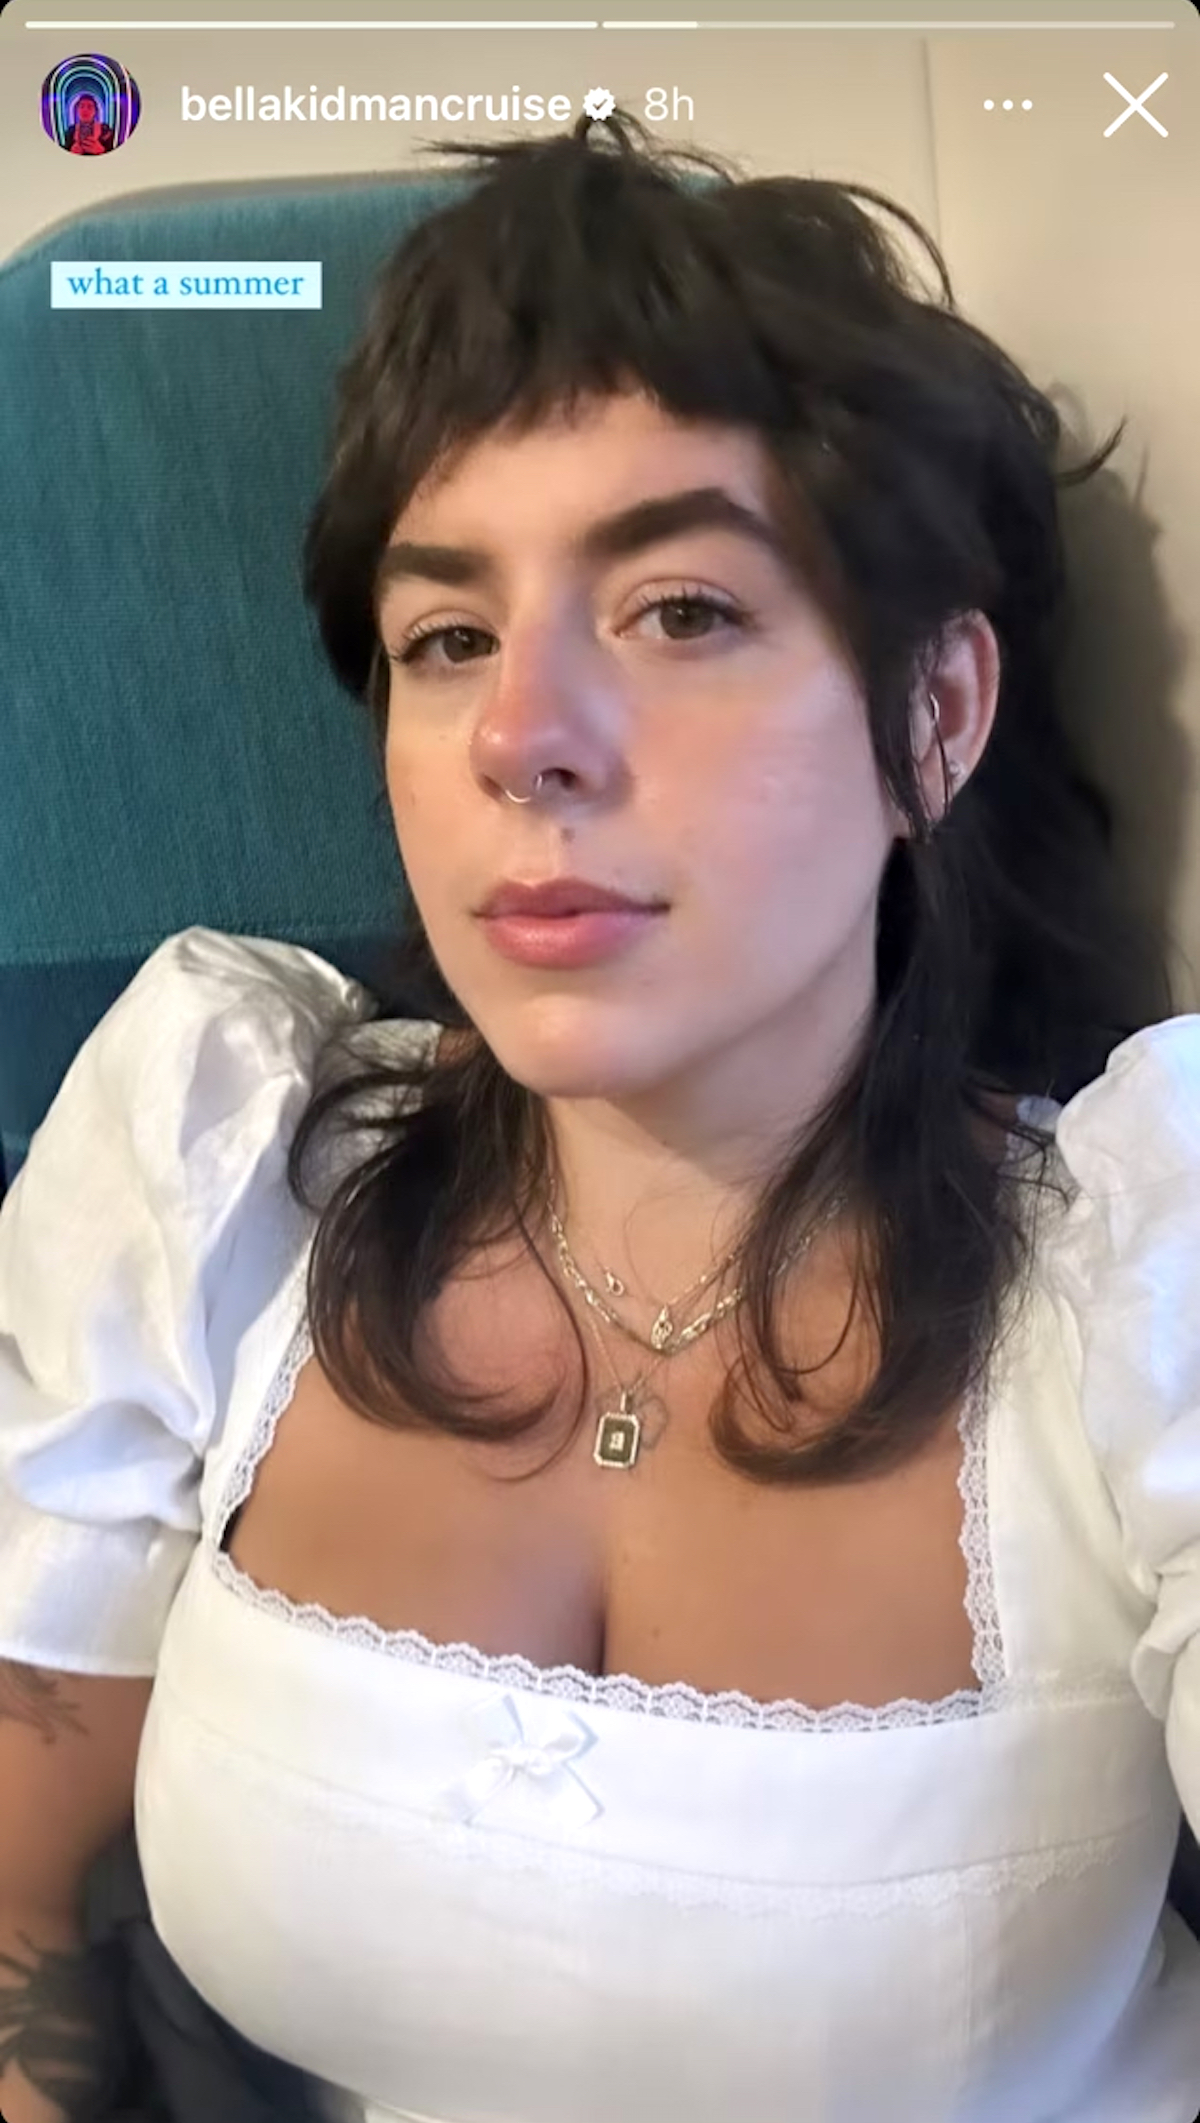 Isabella Jane Cruise wearing a white puff sleeve crop top with a tiny white bow in the middle of her chest and her signature septum ring nose piercing.